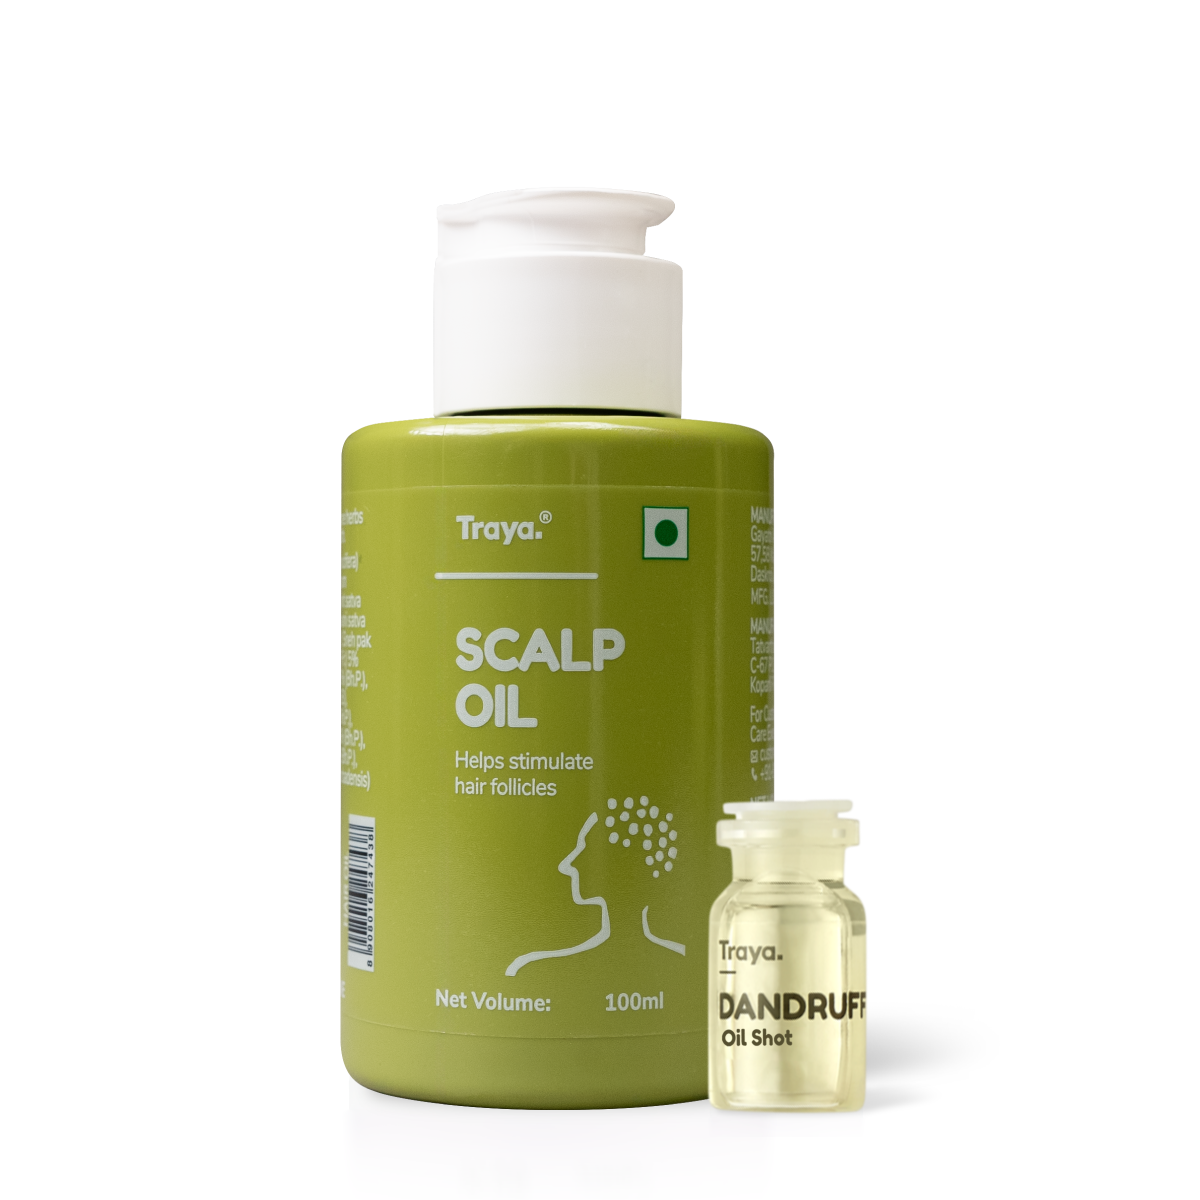 Scalp Oil 100ml with Dandruff Oil Shot | Contains ORPL and Bergamot